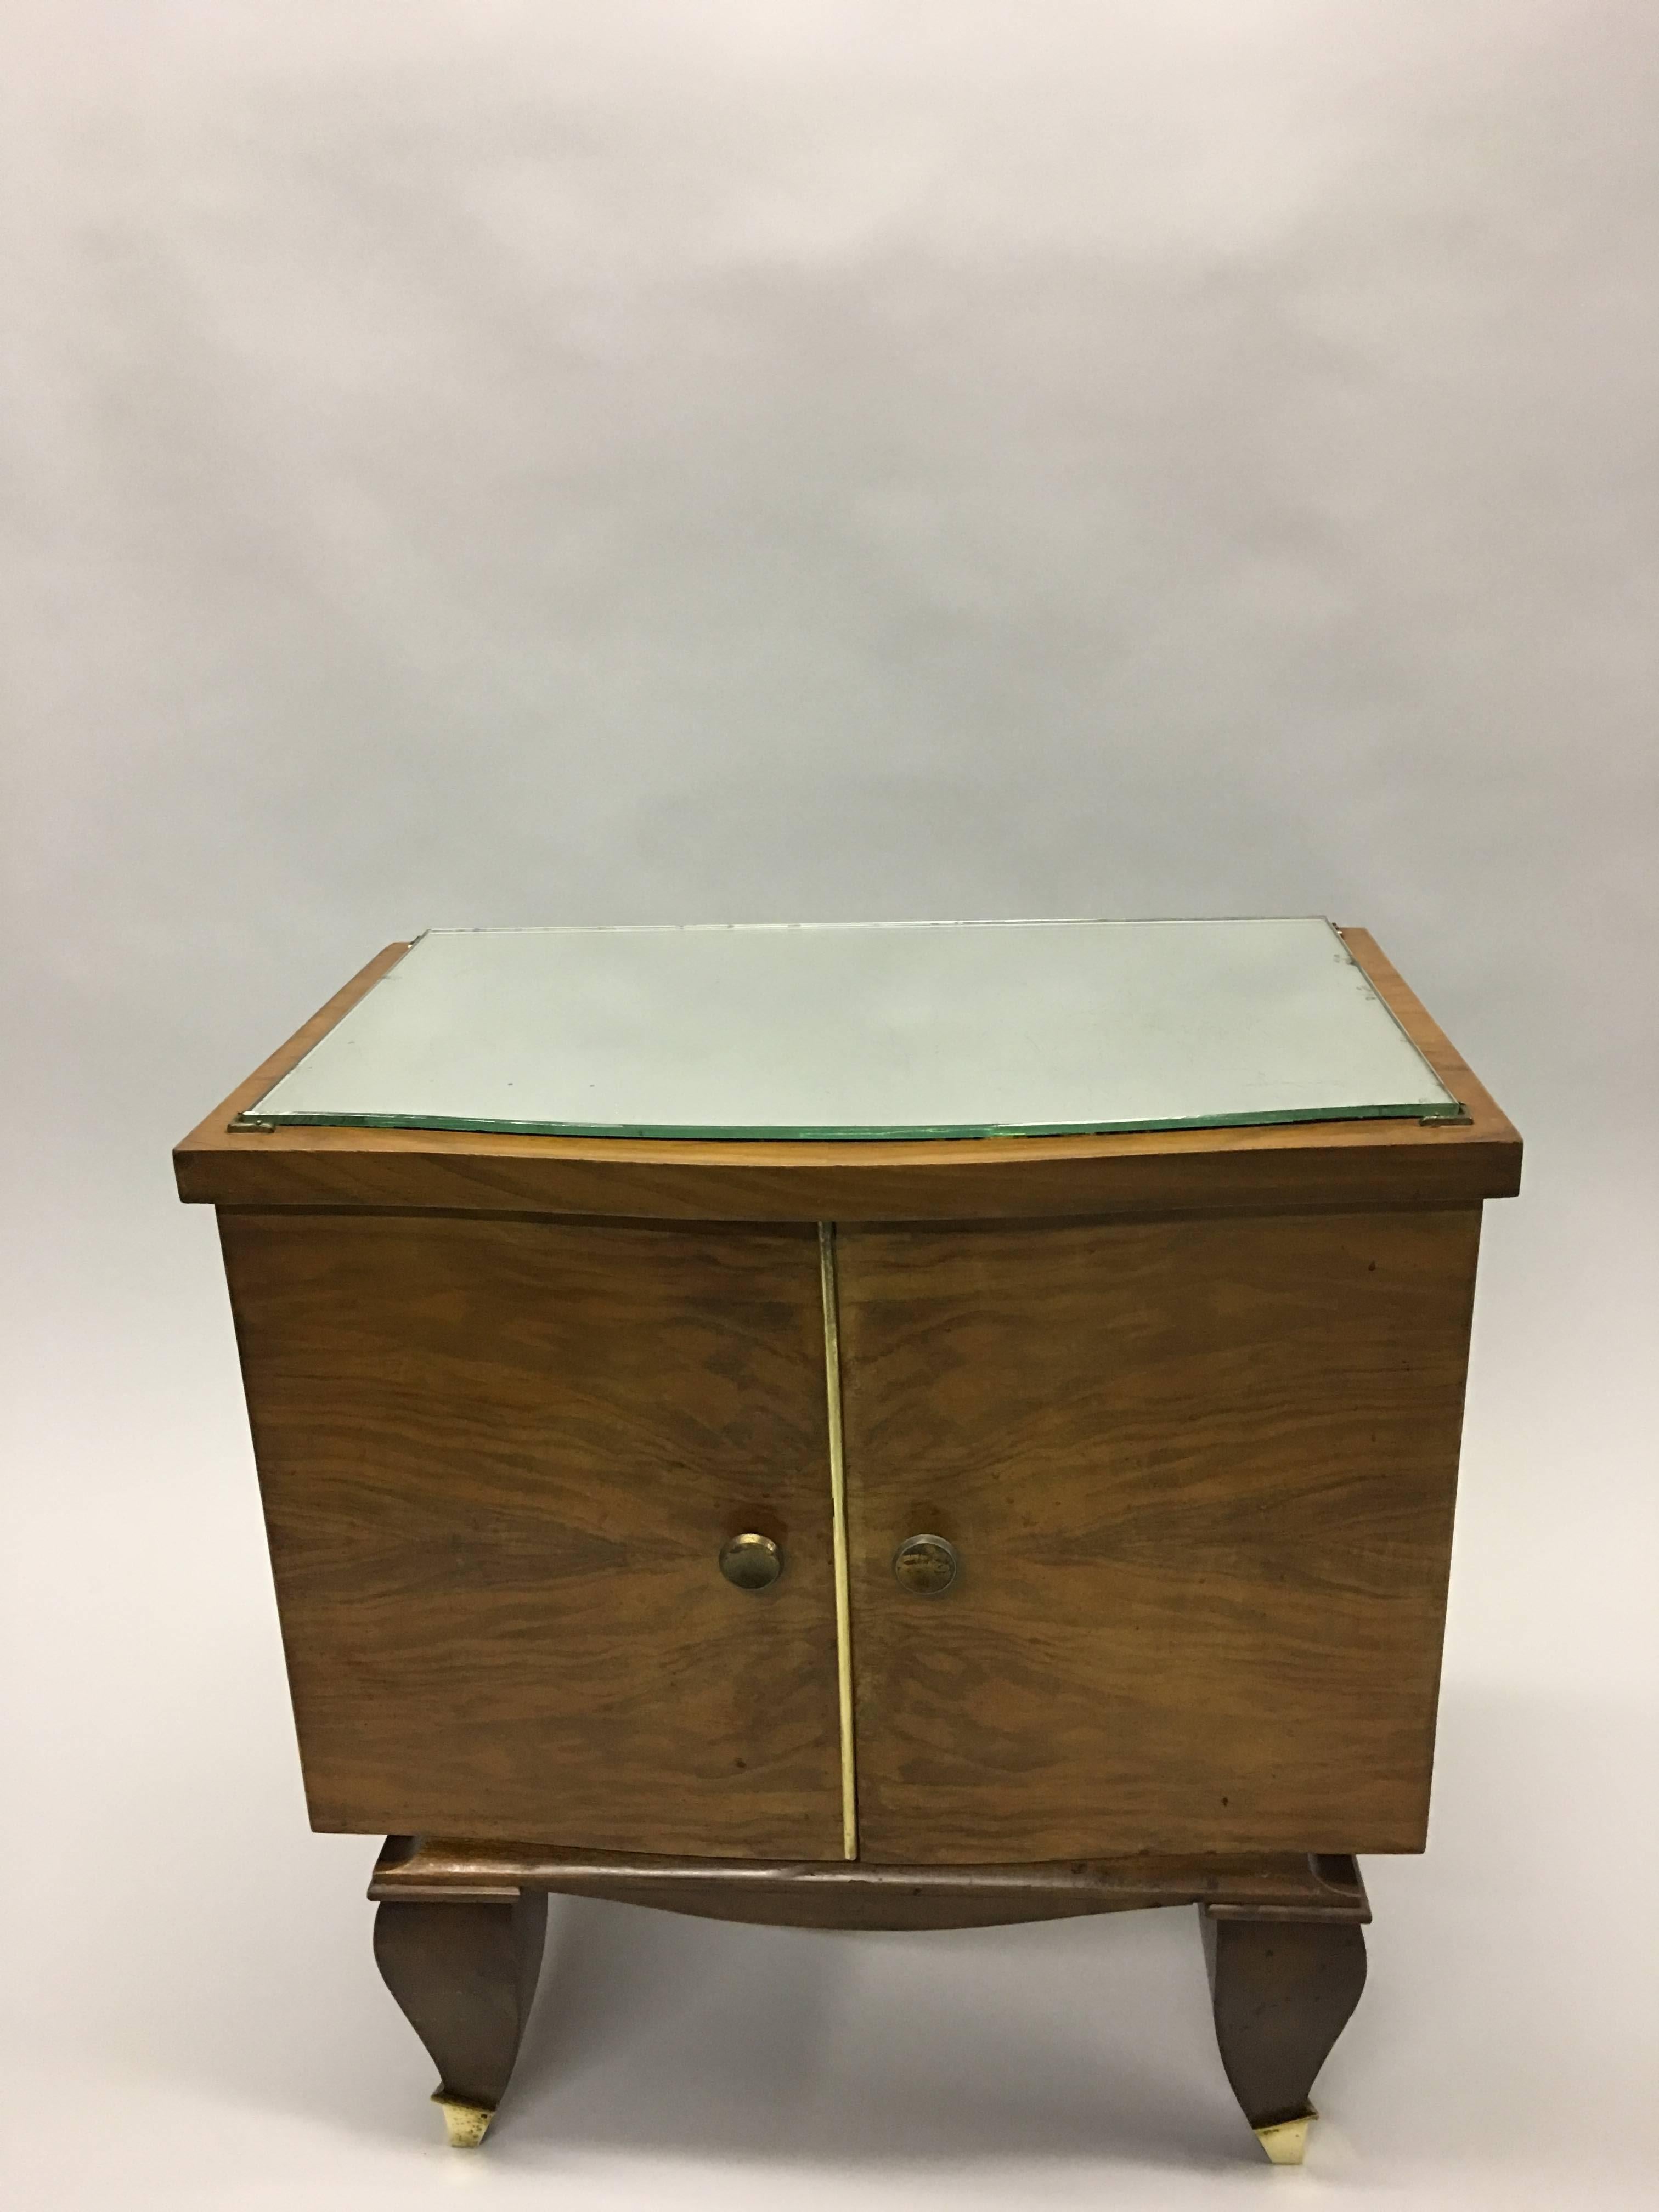 Elegant pair of French Mid-Century Modern neoclassical side tables/nightstands attributed to Rene Prou, circa 1940. 

The pieces are composed of veneered fruitwood and cantilevered above the 4 legs. The front feet have brass sabots. A mirror top